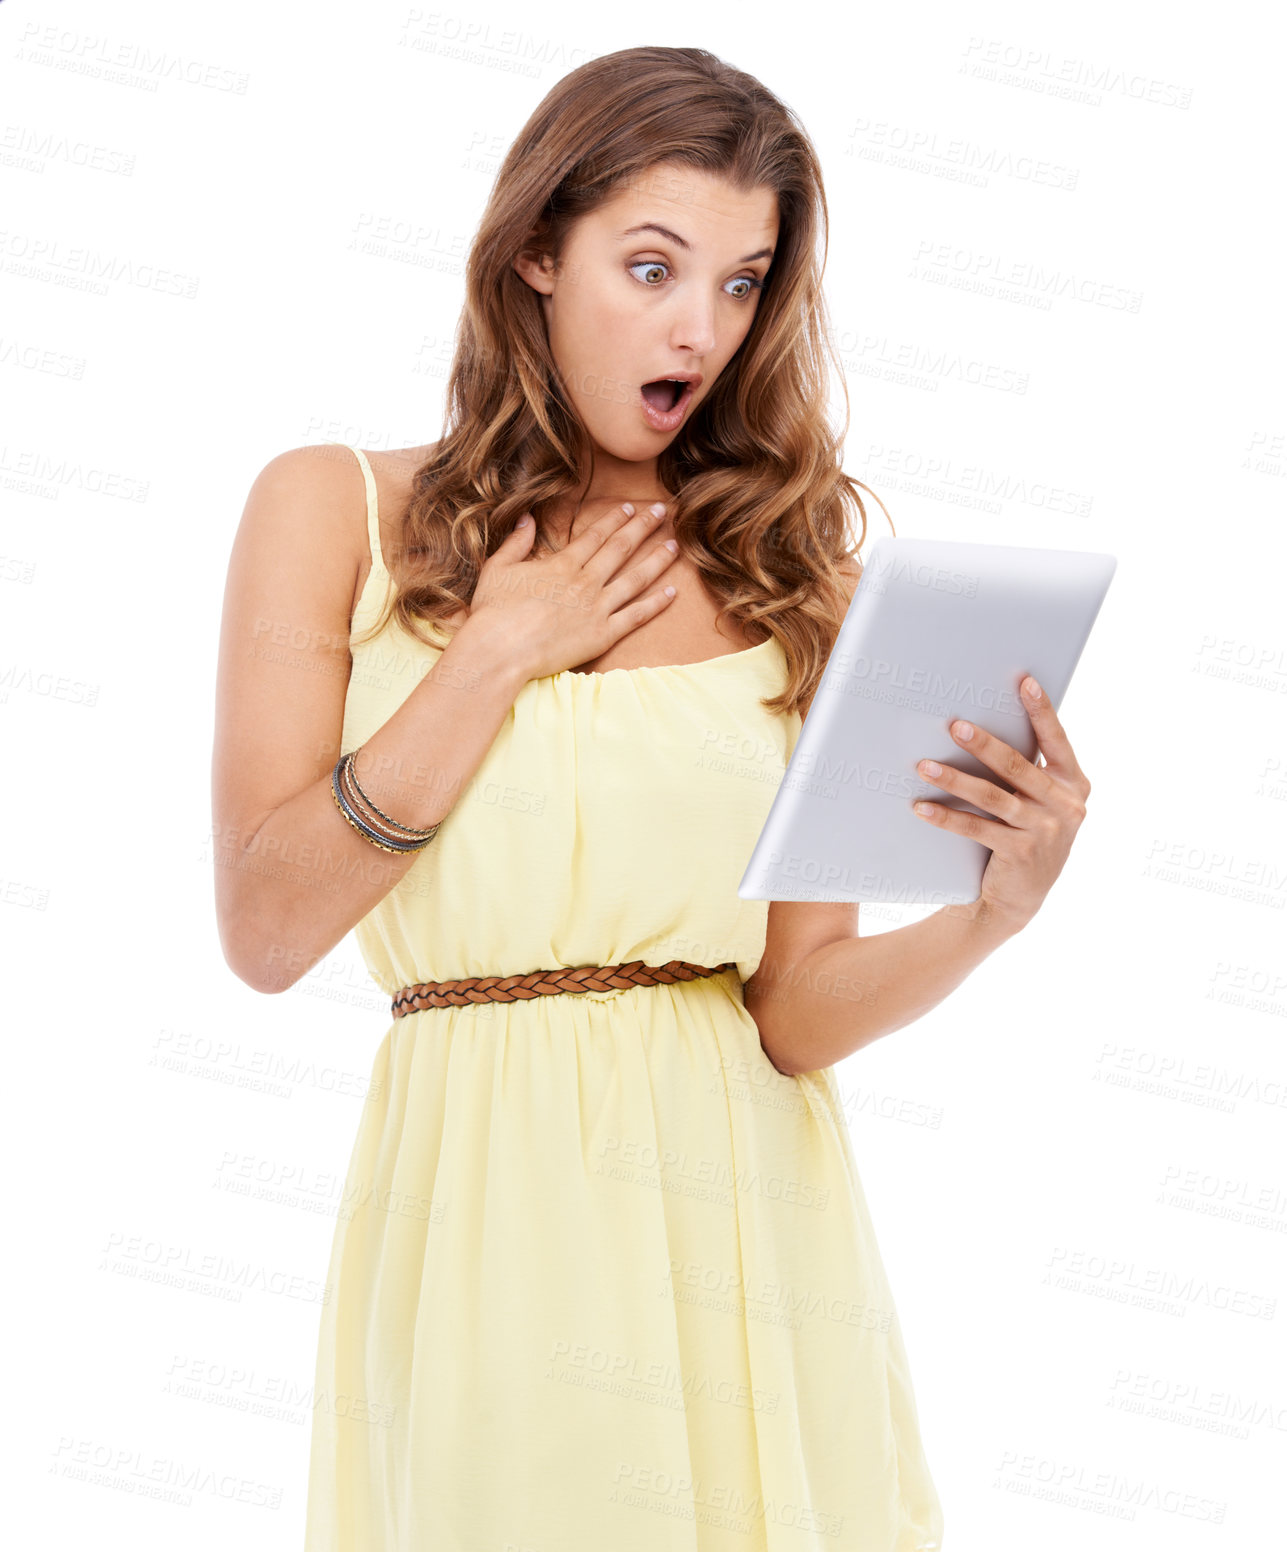 Buy stock photo Studio shot of a surprised looking young woman holding a digital tablet